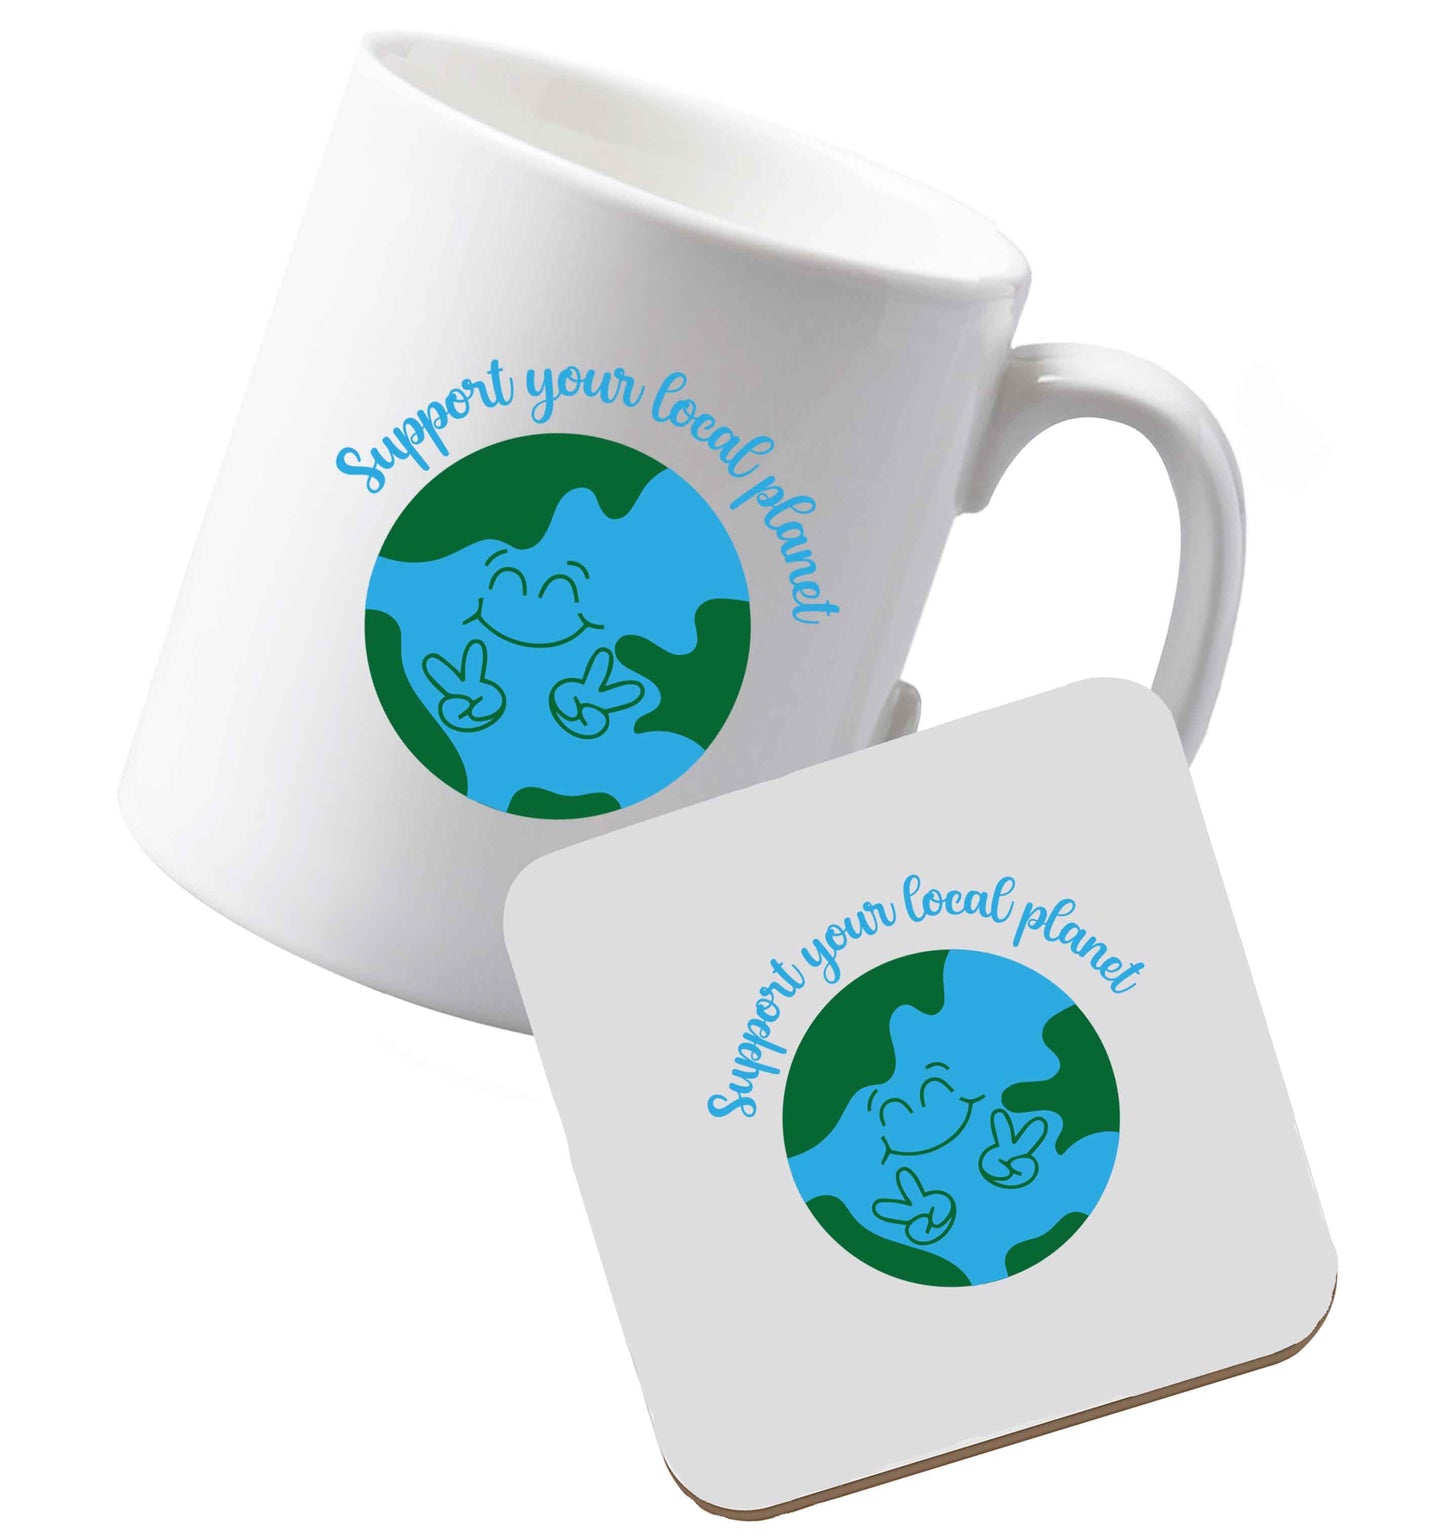 10 oz Ceramic mug and coaster Support your local planet both sides